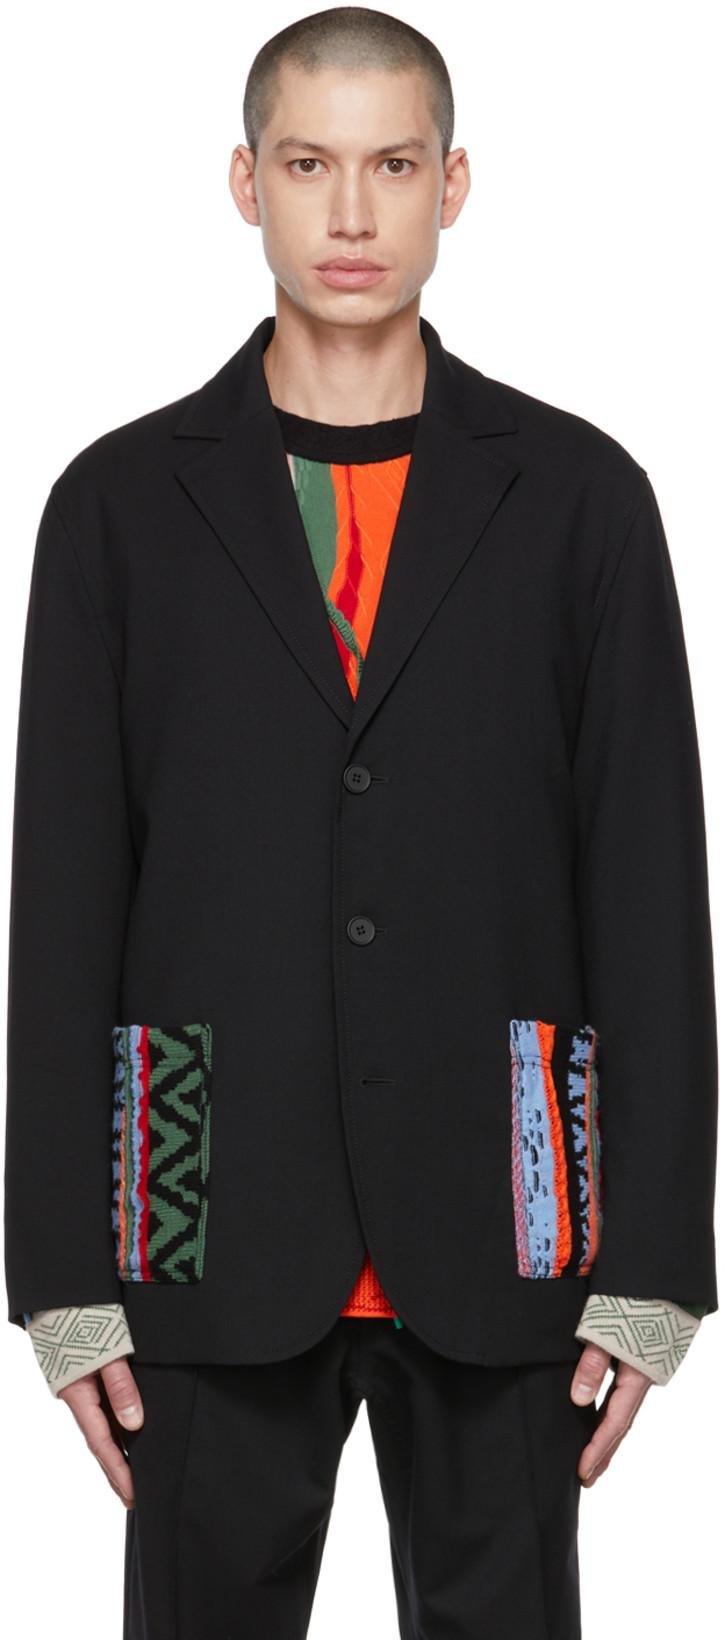 Black Embroidered Blazer by A PERSONAL NOTE 73